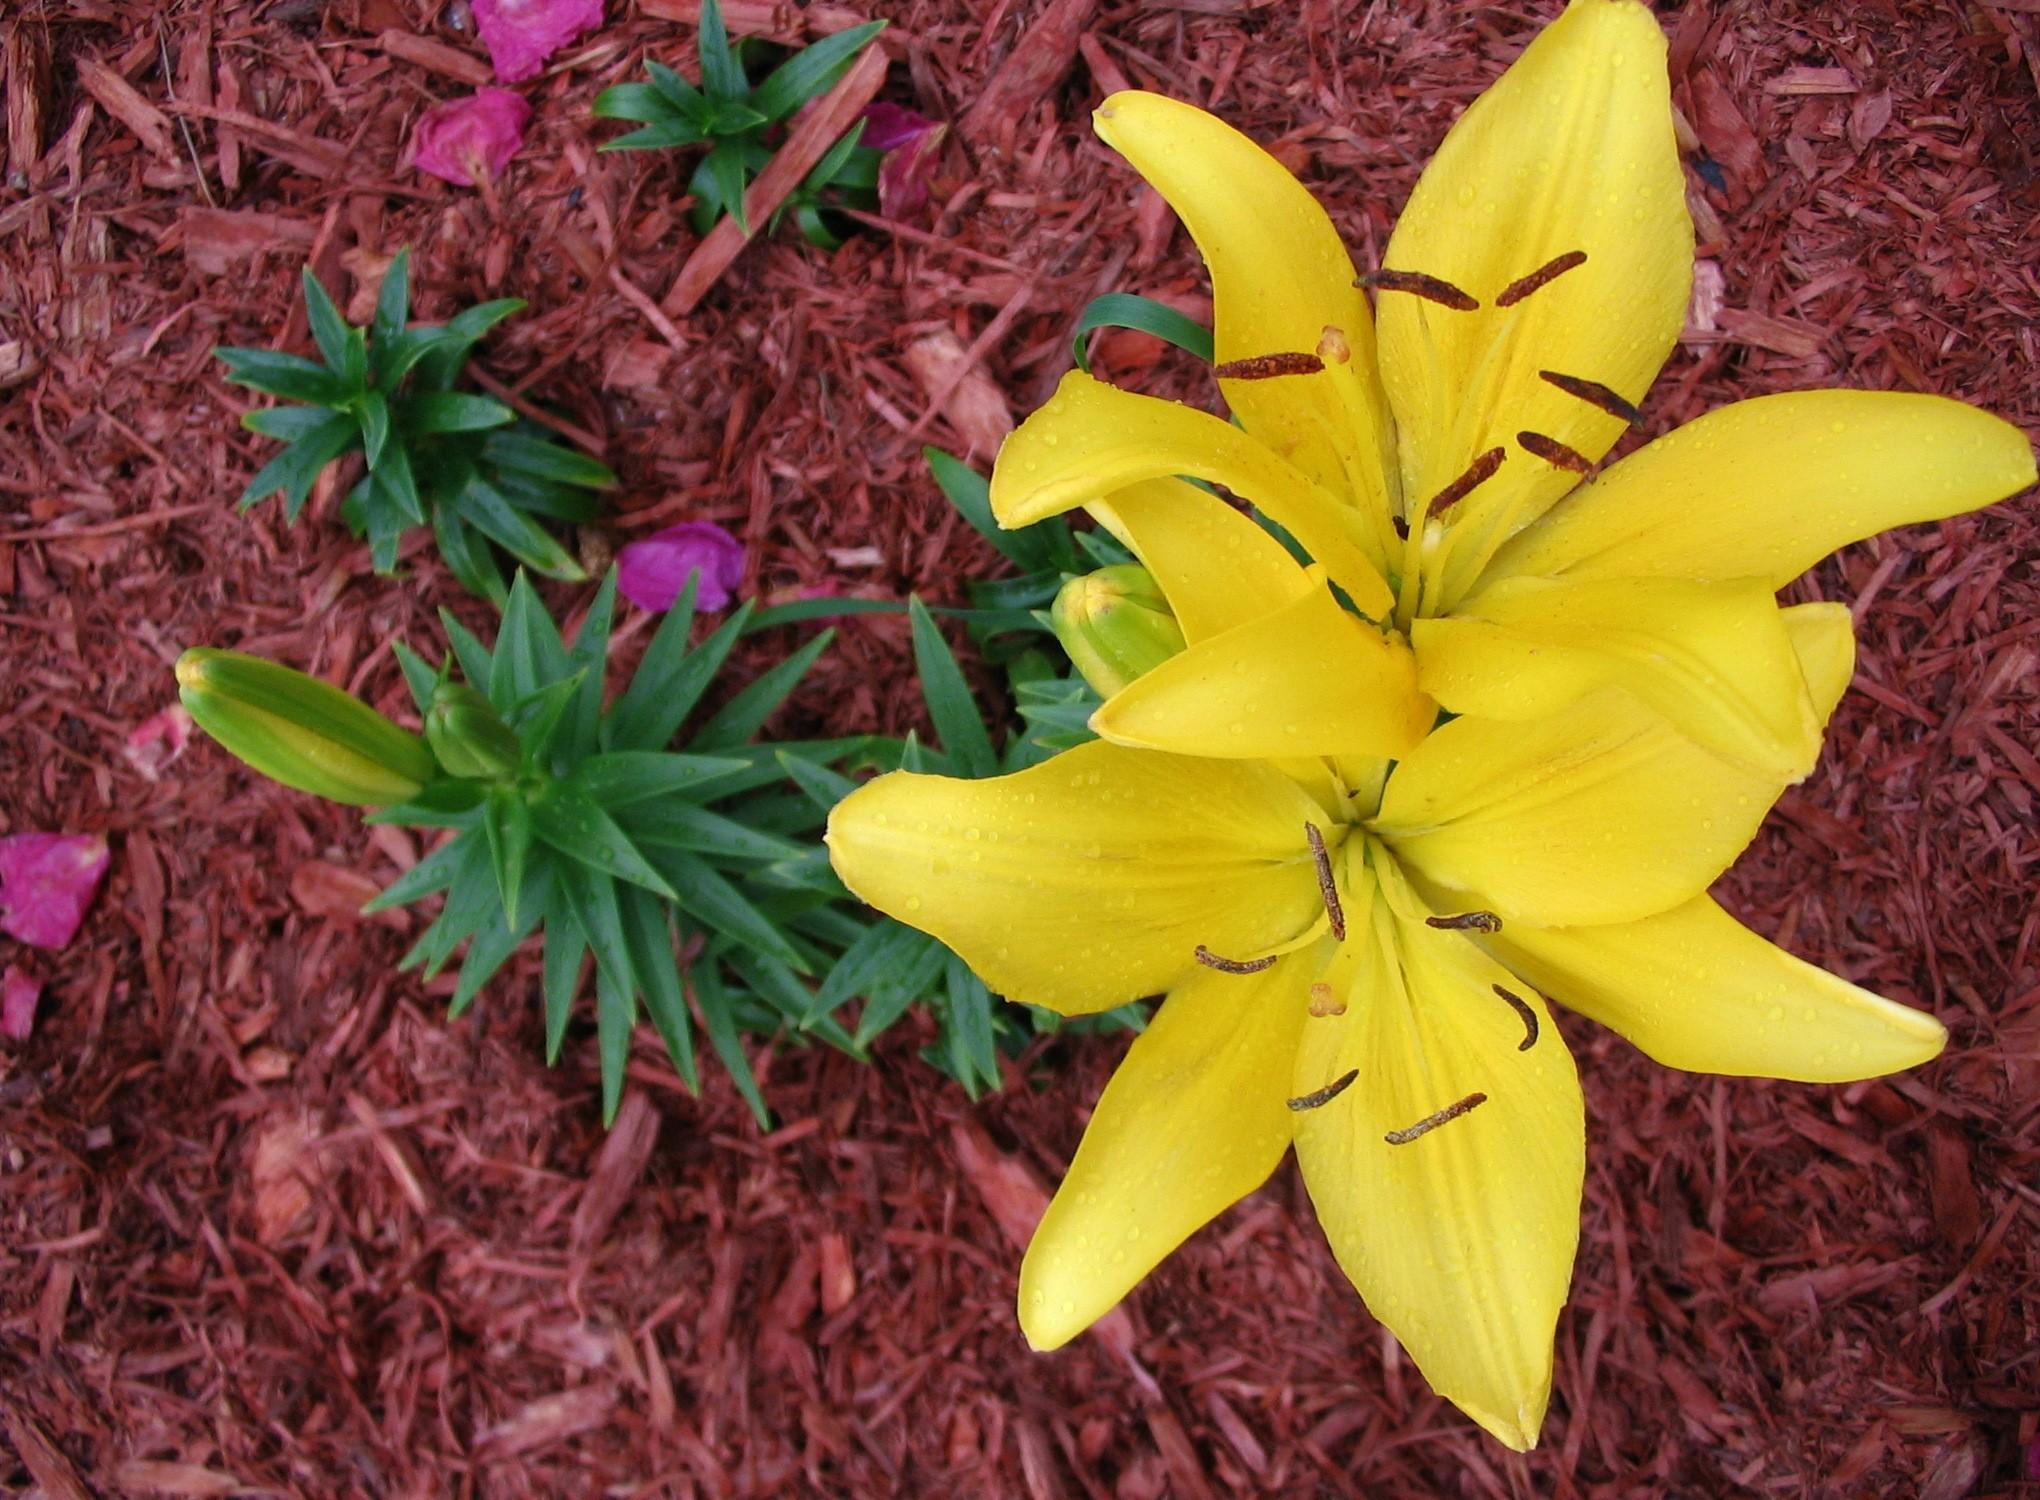 drops, flowers, lilies, yellow, flower bed, flowerbed, freshness, loose, dissolved, fertilizers cellphone